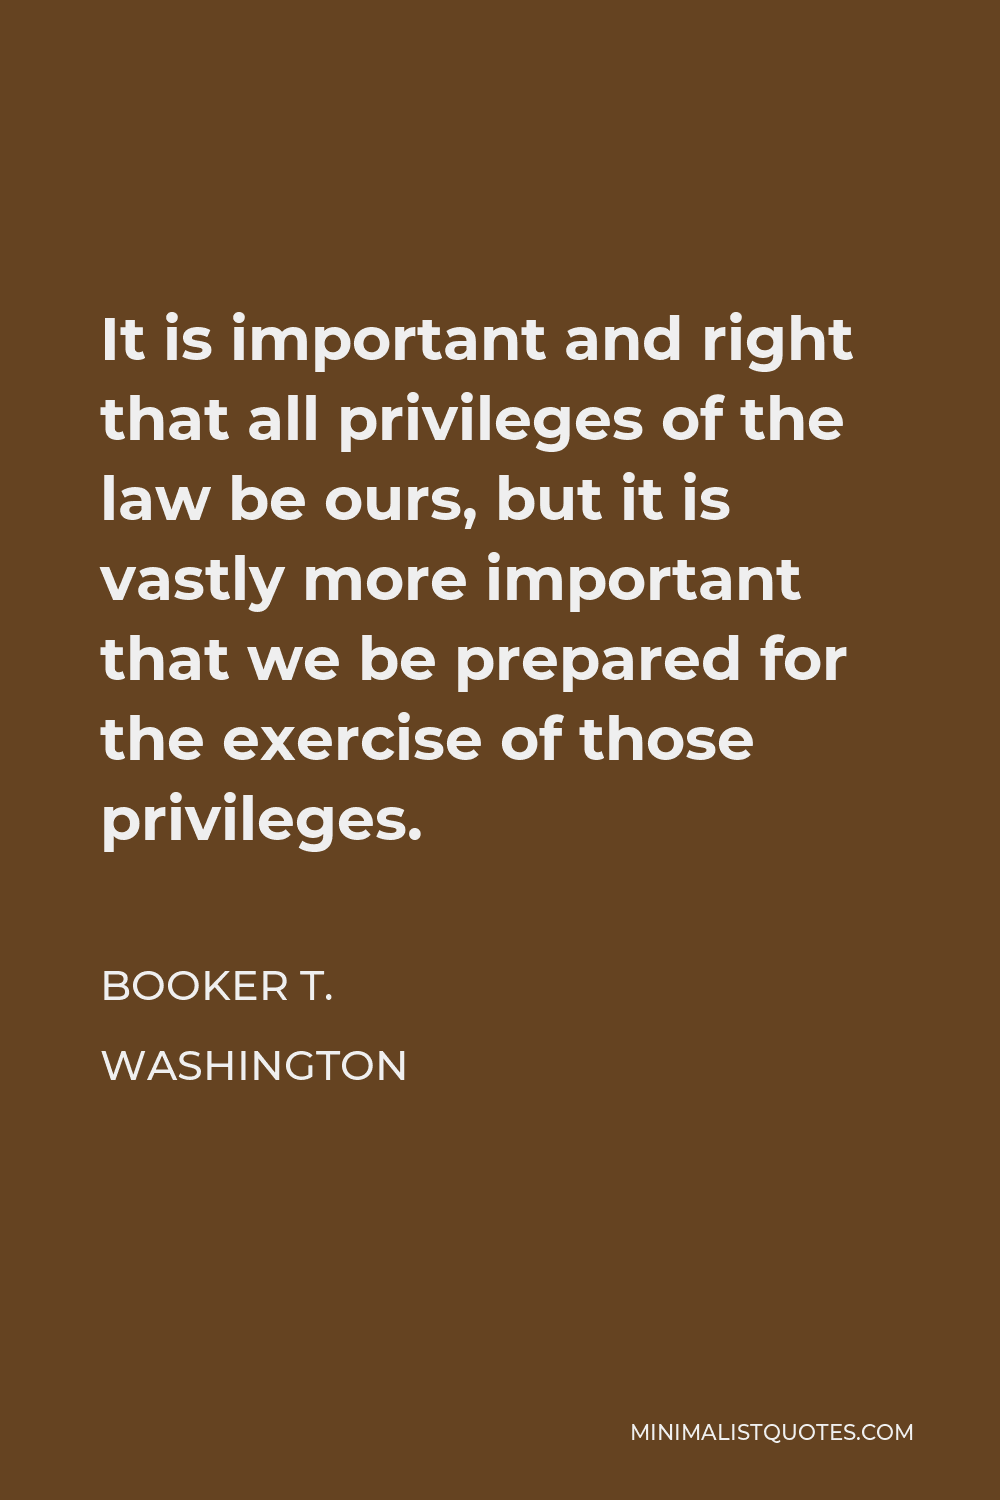 Booker T. Washington Quote - It is important and right that all privileges of the law be ours, but it is vastly more important that we be prepared for the exercise of those privileges.